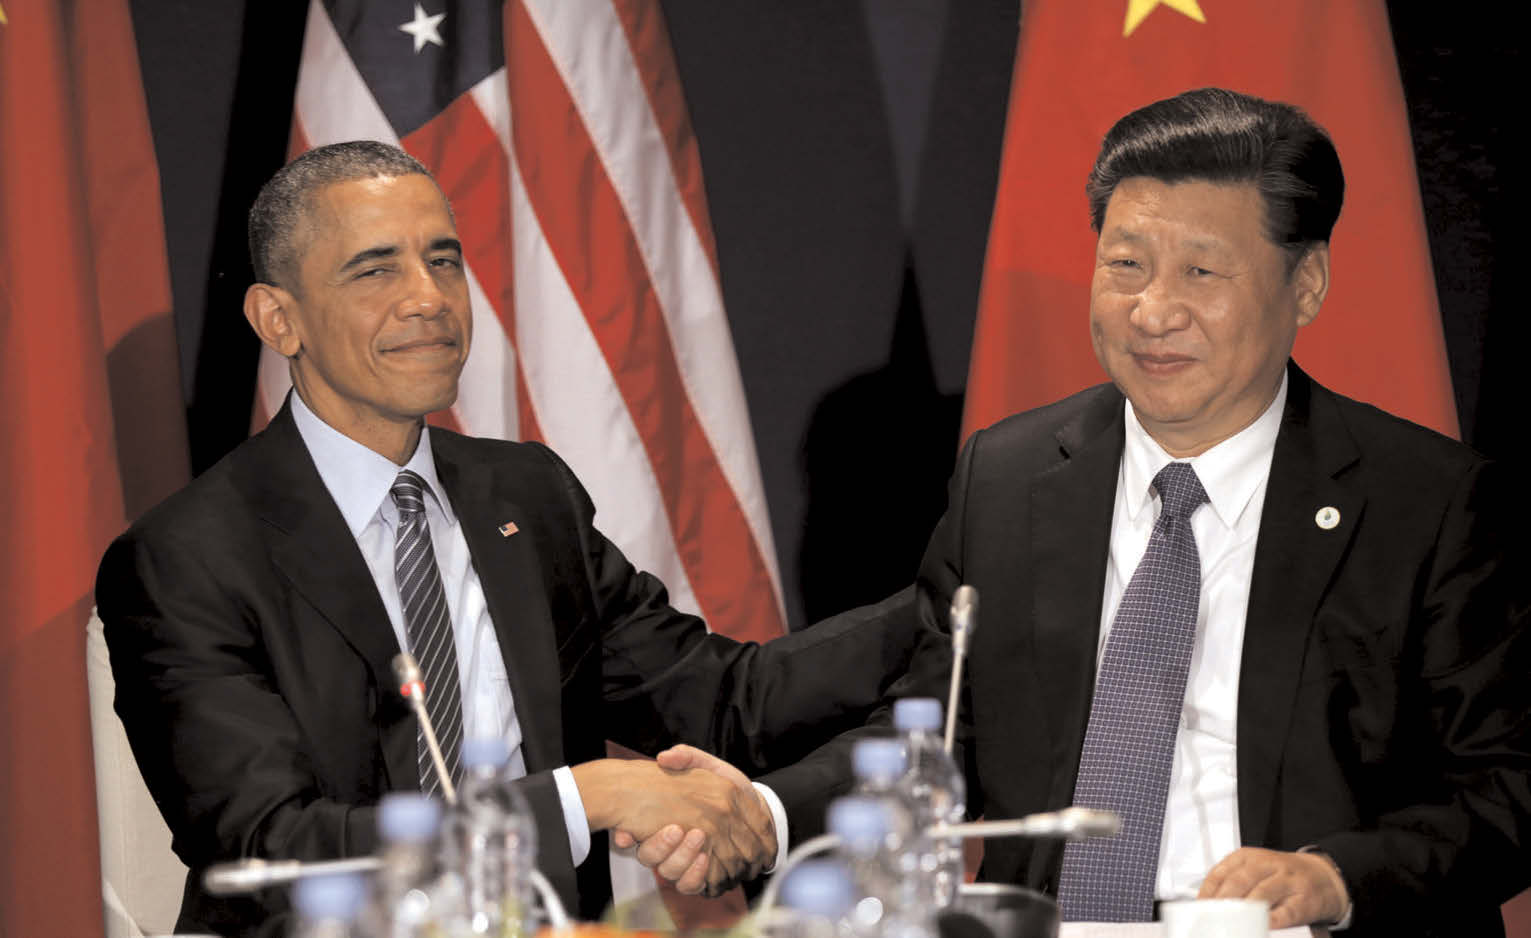 U.S. President Barack Obama shakes hands with Chinese President Xi Jinping during their meeting at the start of the climate summit in Paris last year (File photo)